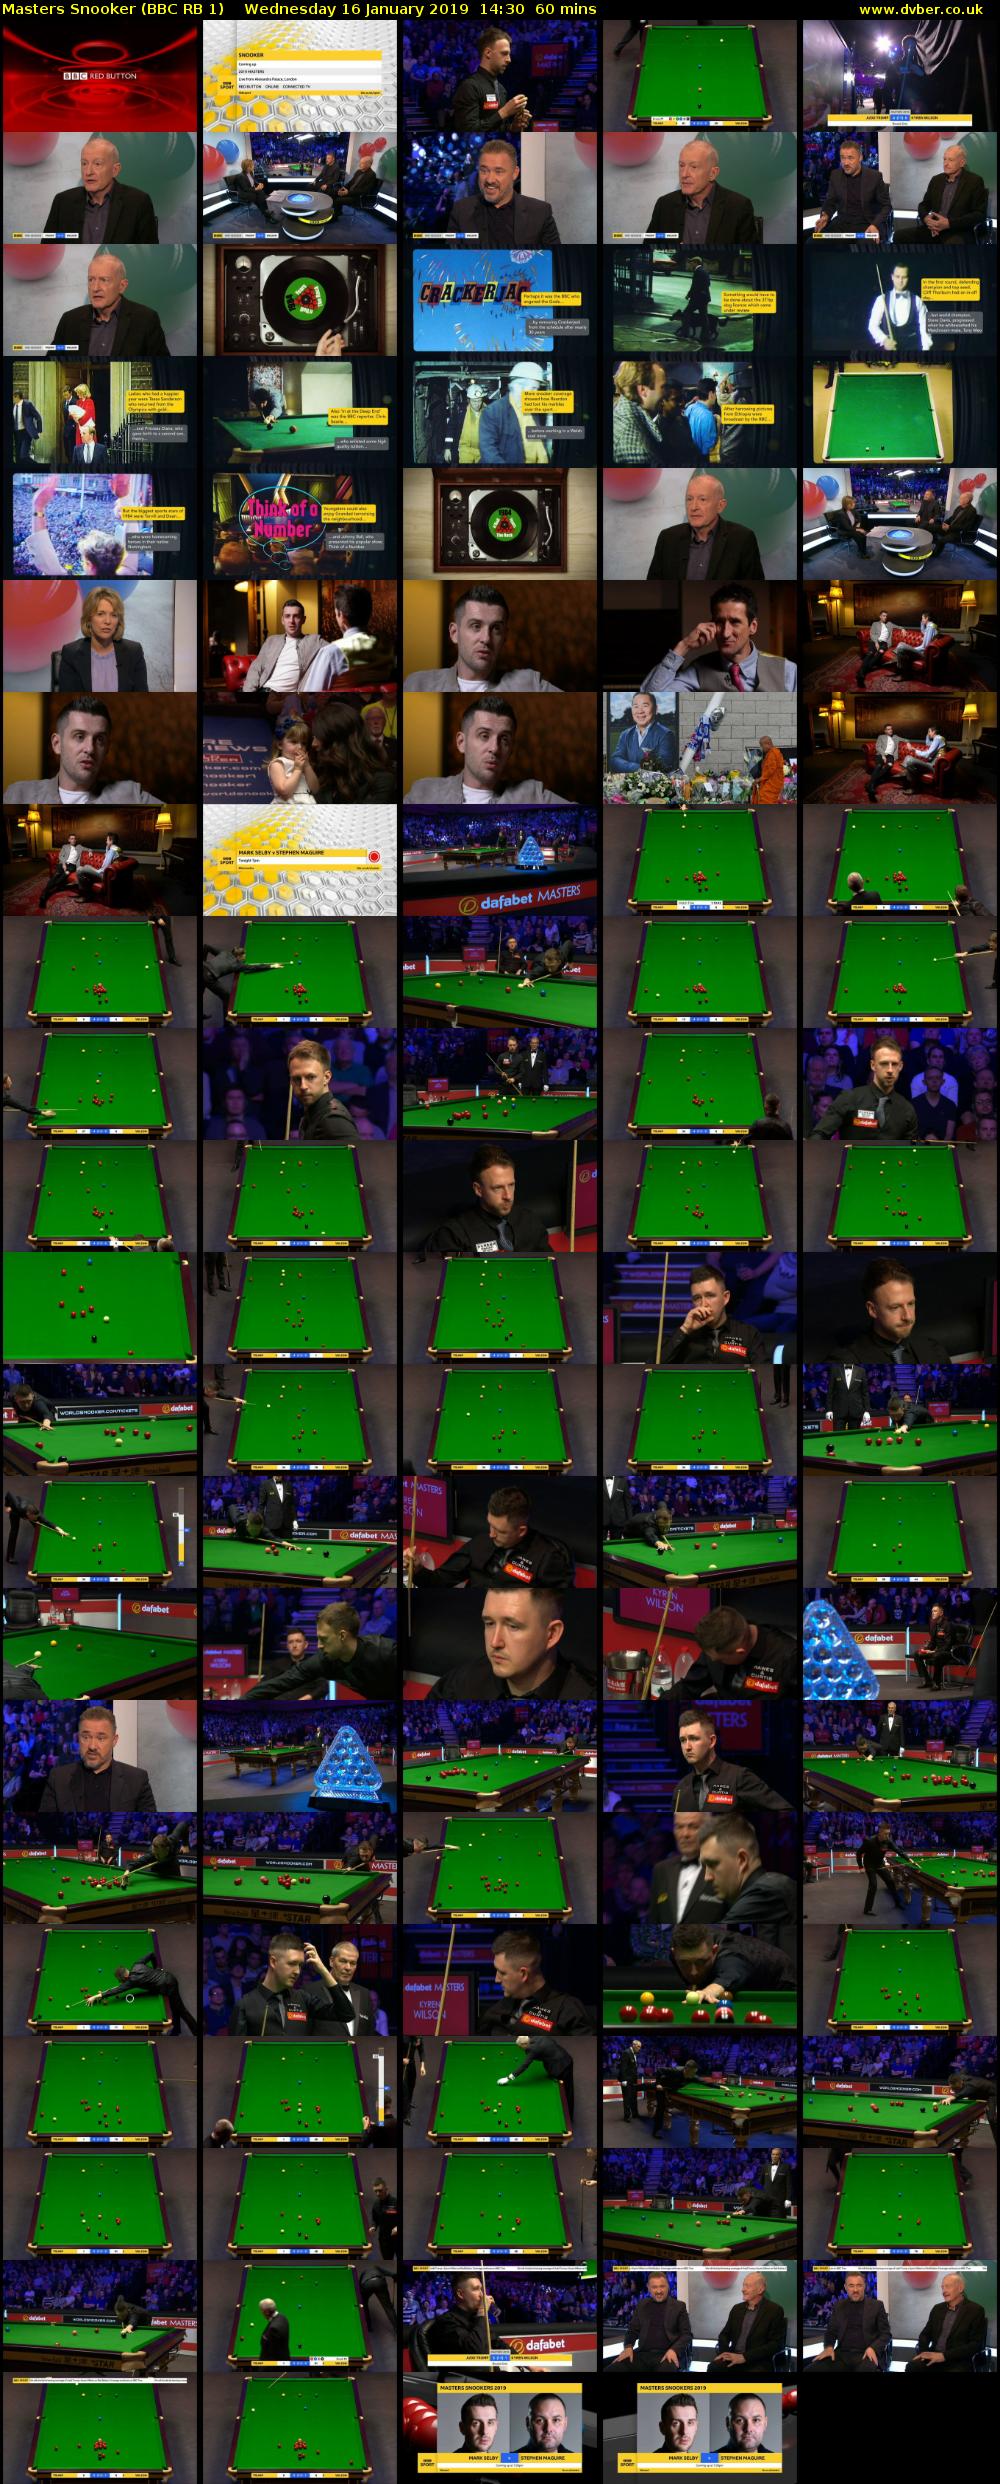 Masters Snooker (BBC RB 1) Wednesday 16 January 2019 14:30 - 15:30